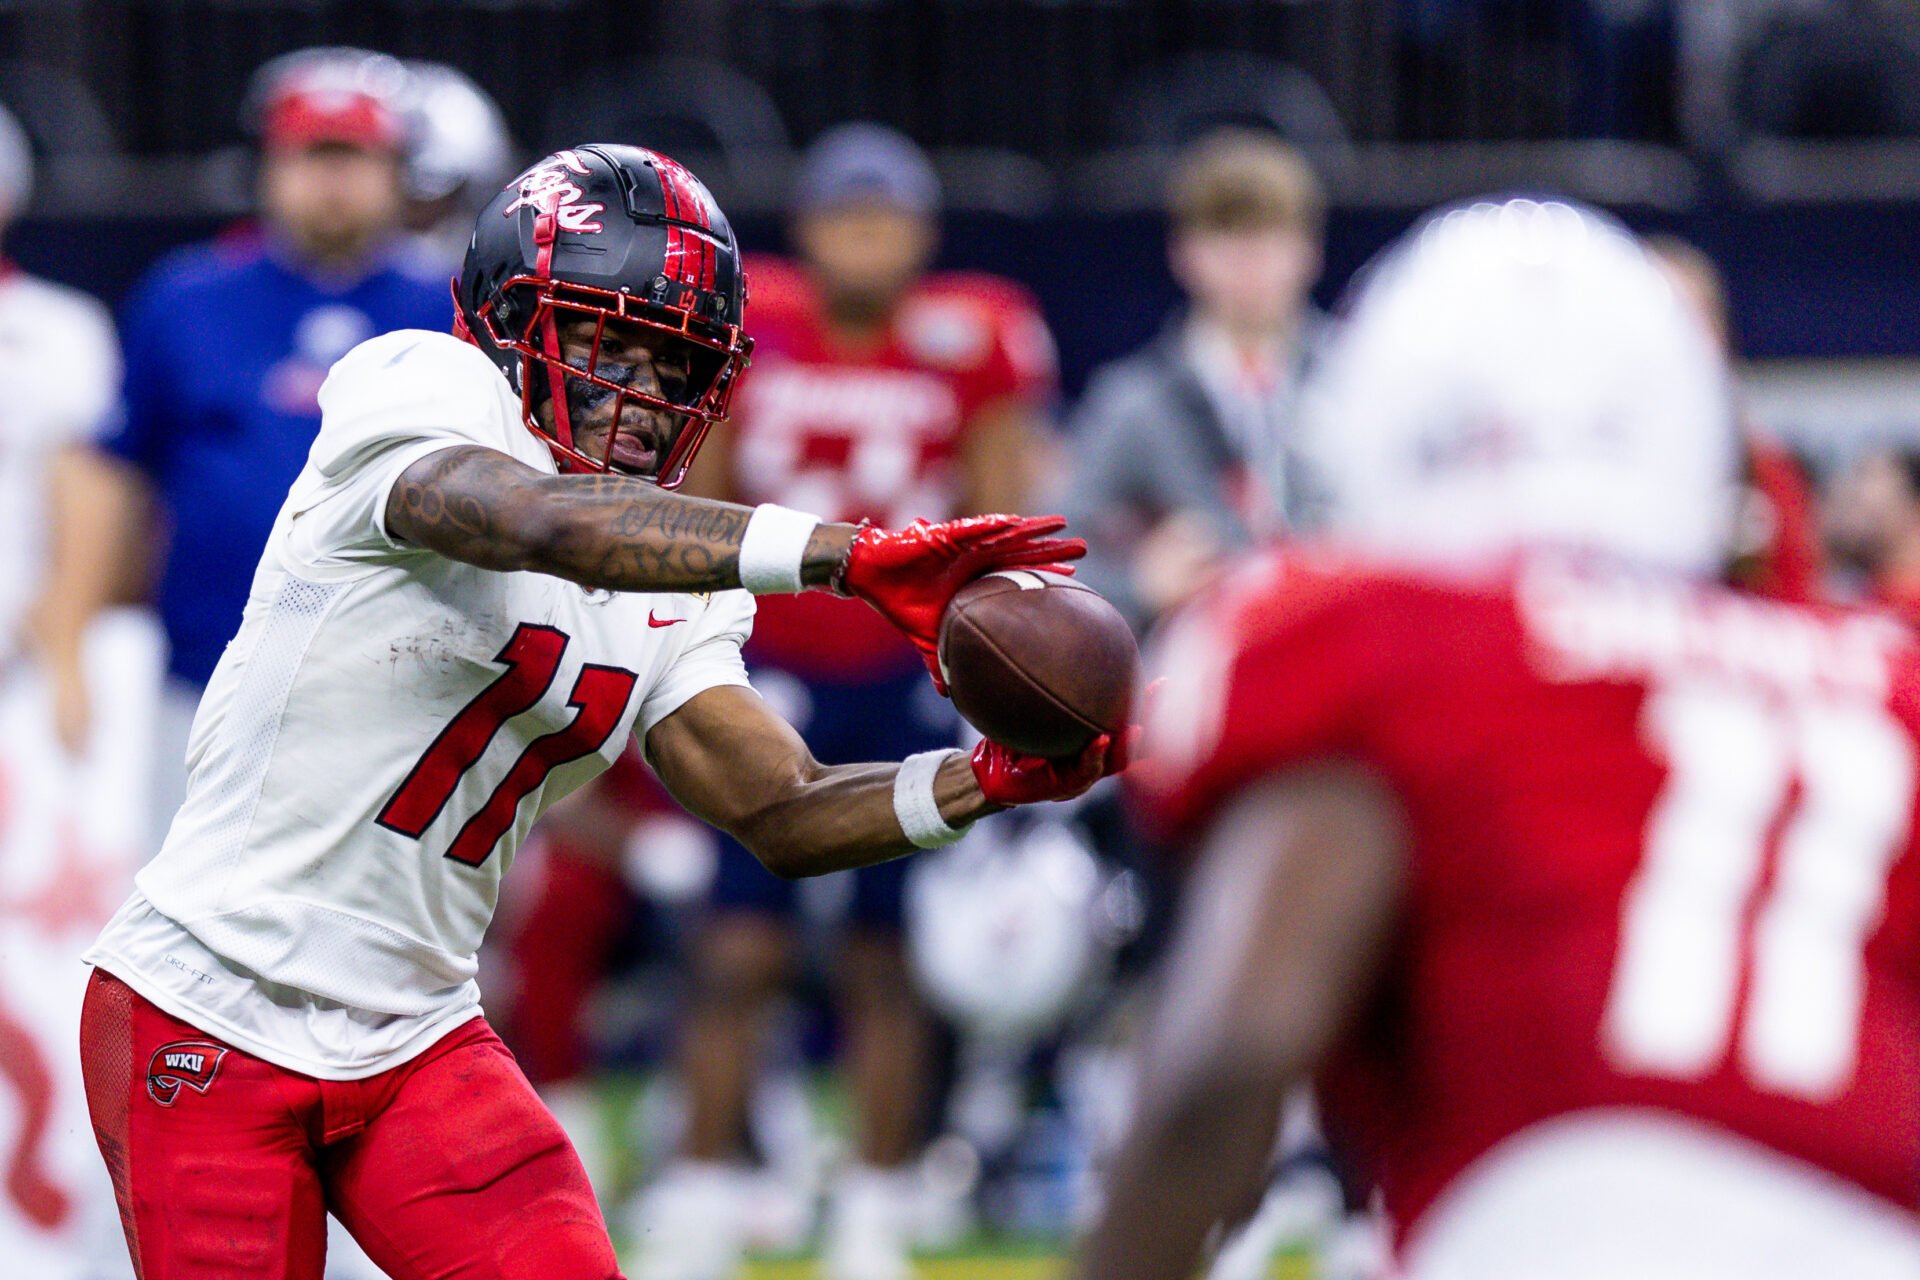 Dec 21, 2022; New Orleans, Louisiana, USA; Western Kentucky Hilltoppers wide receiver Malachi Corley (11) catches a pass against South Alabama Jaguars defensive lineman Jamie Sheriff (11) during the second half at Caesars Superdome.